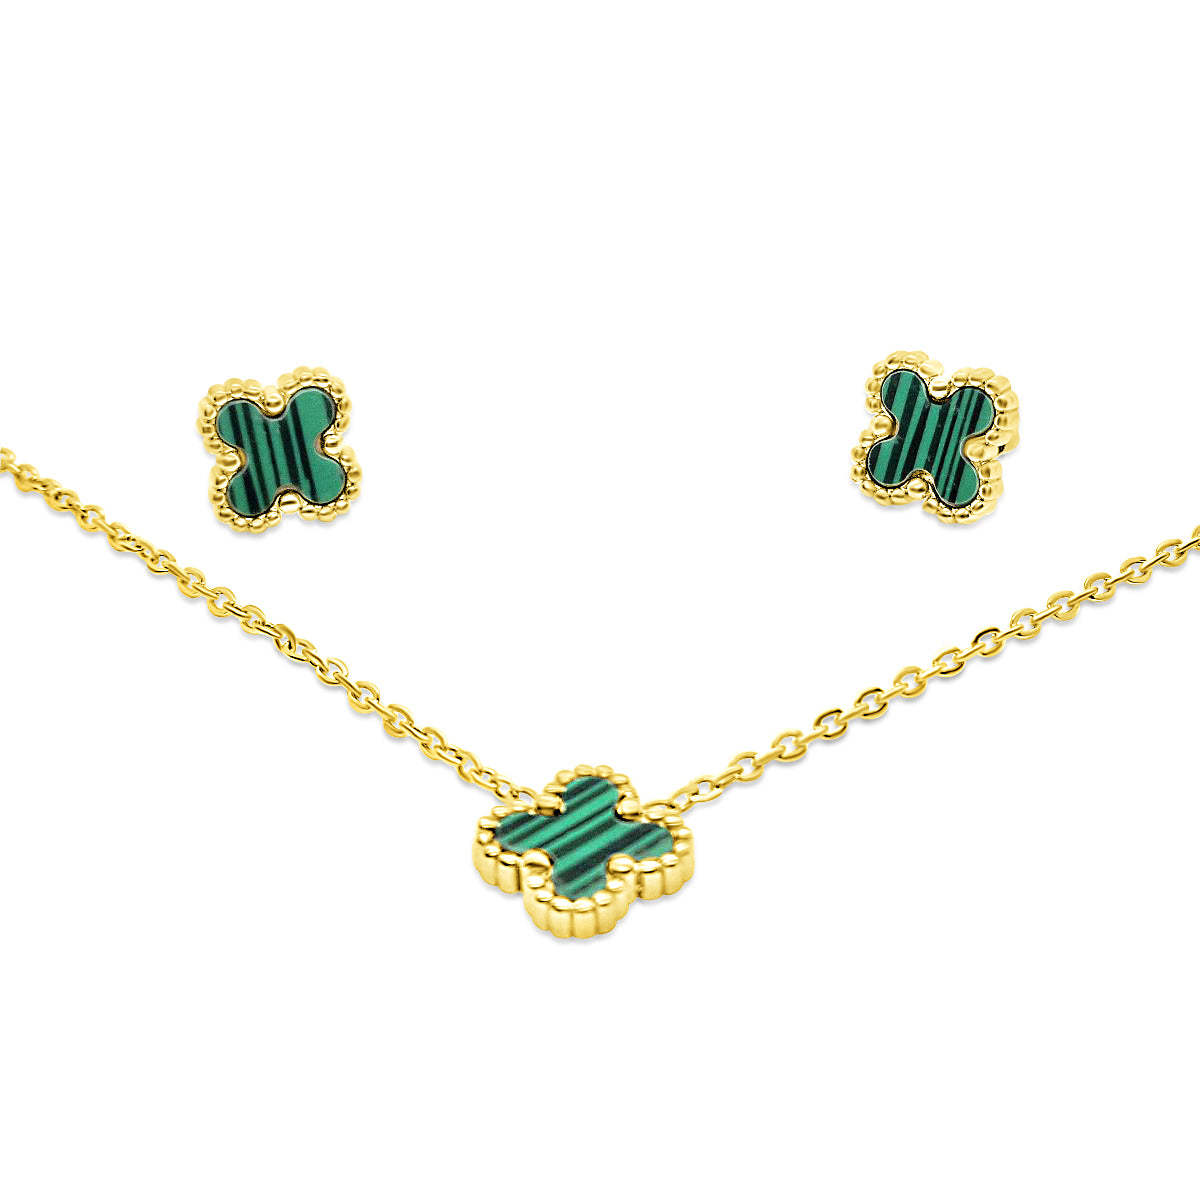 Mini four leaf clover necklace and earrings set